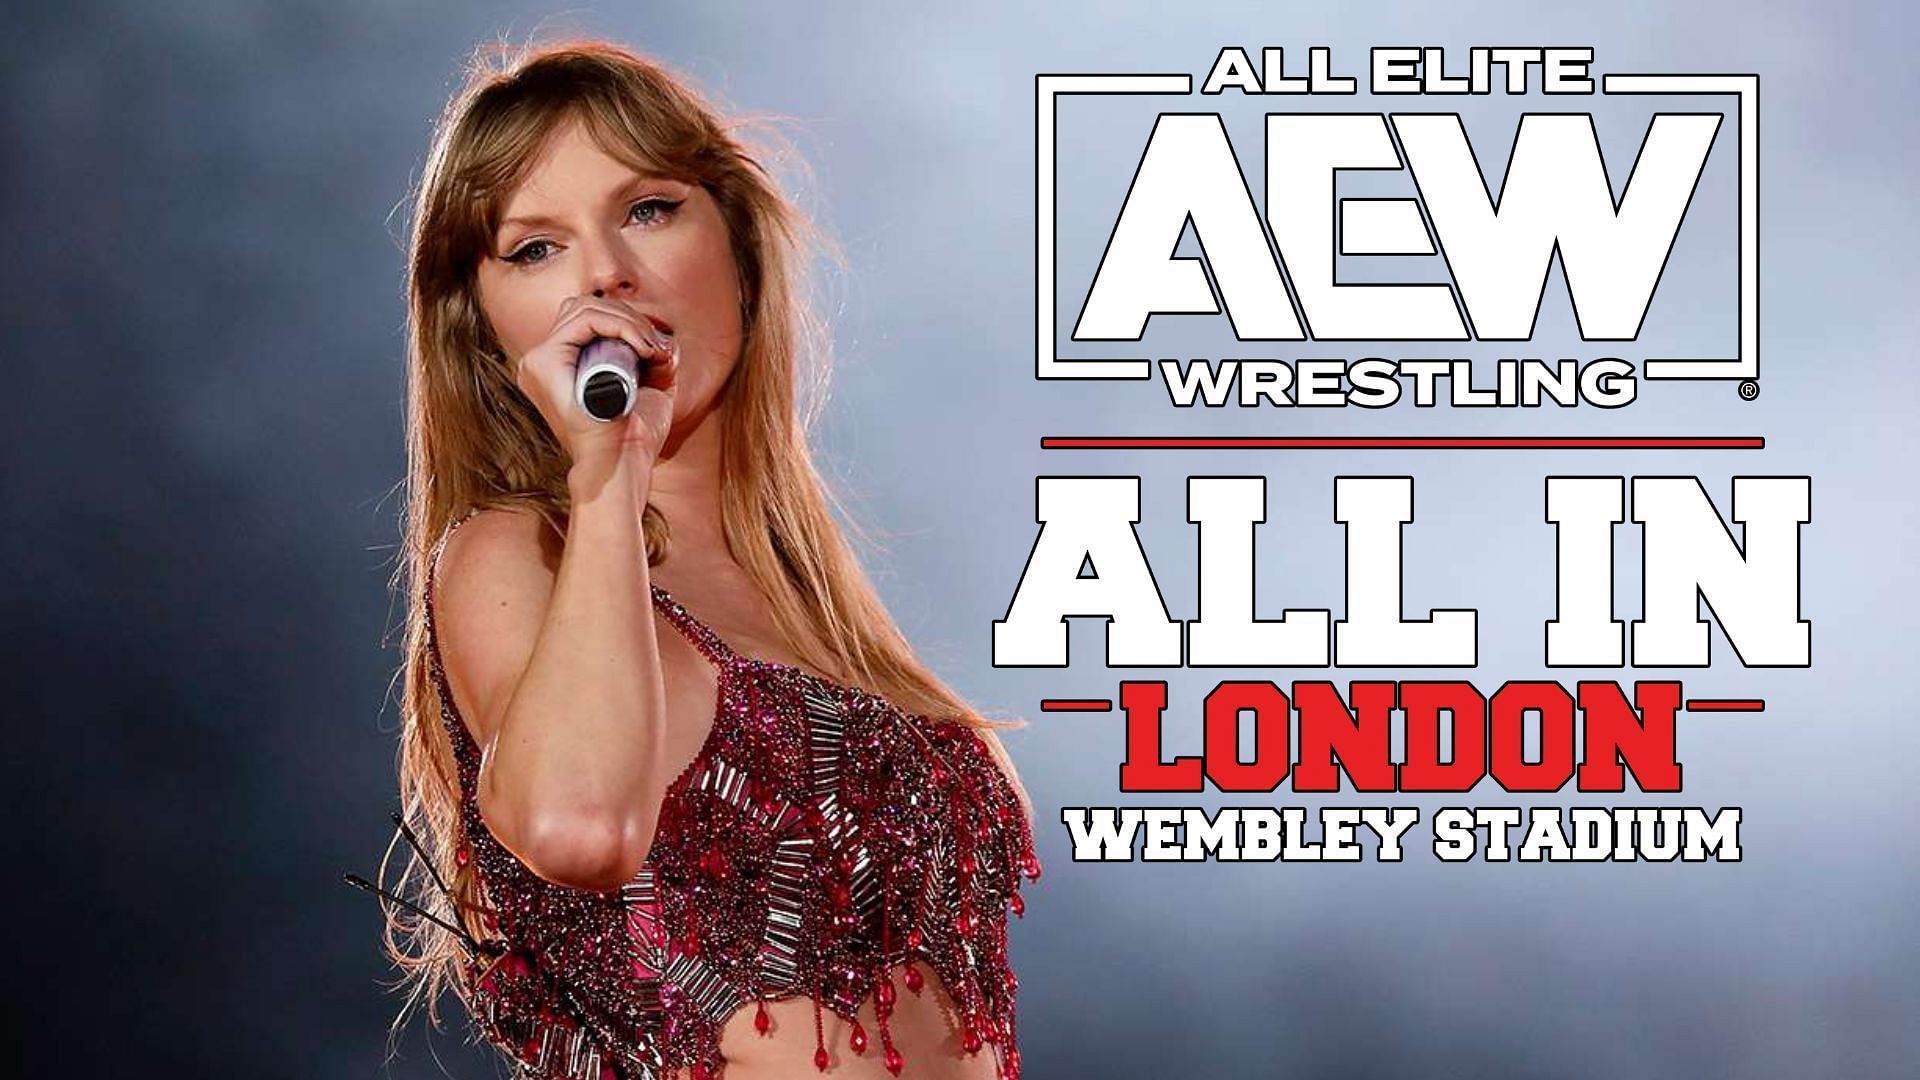 Taylor Swift played a significant role in altering AEW